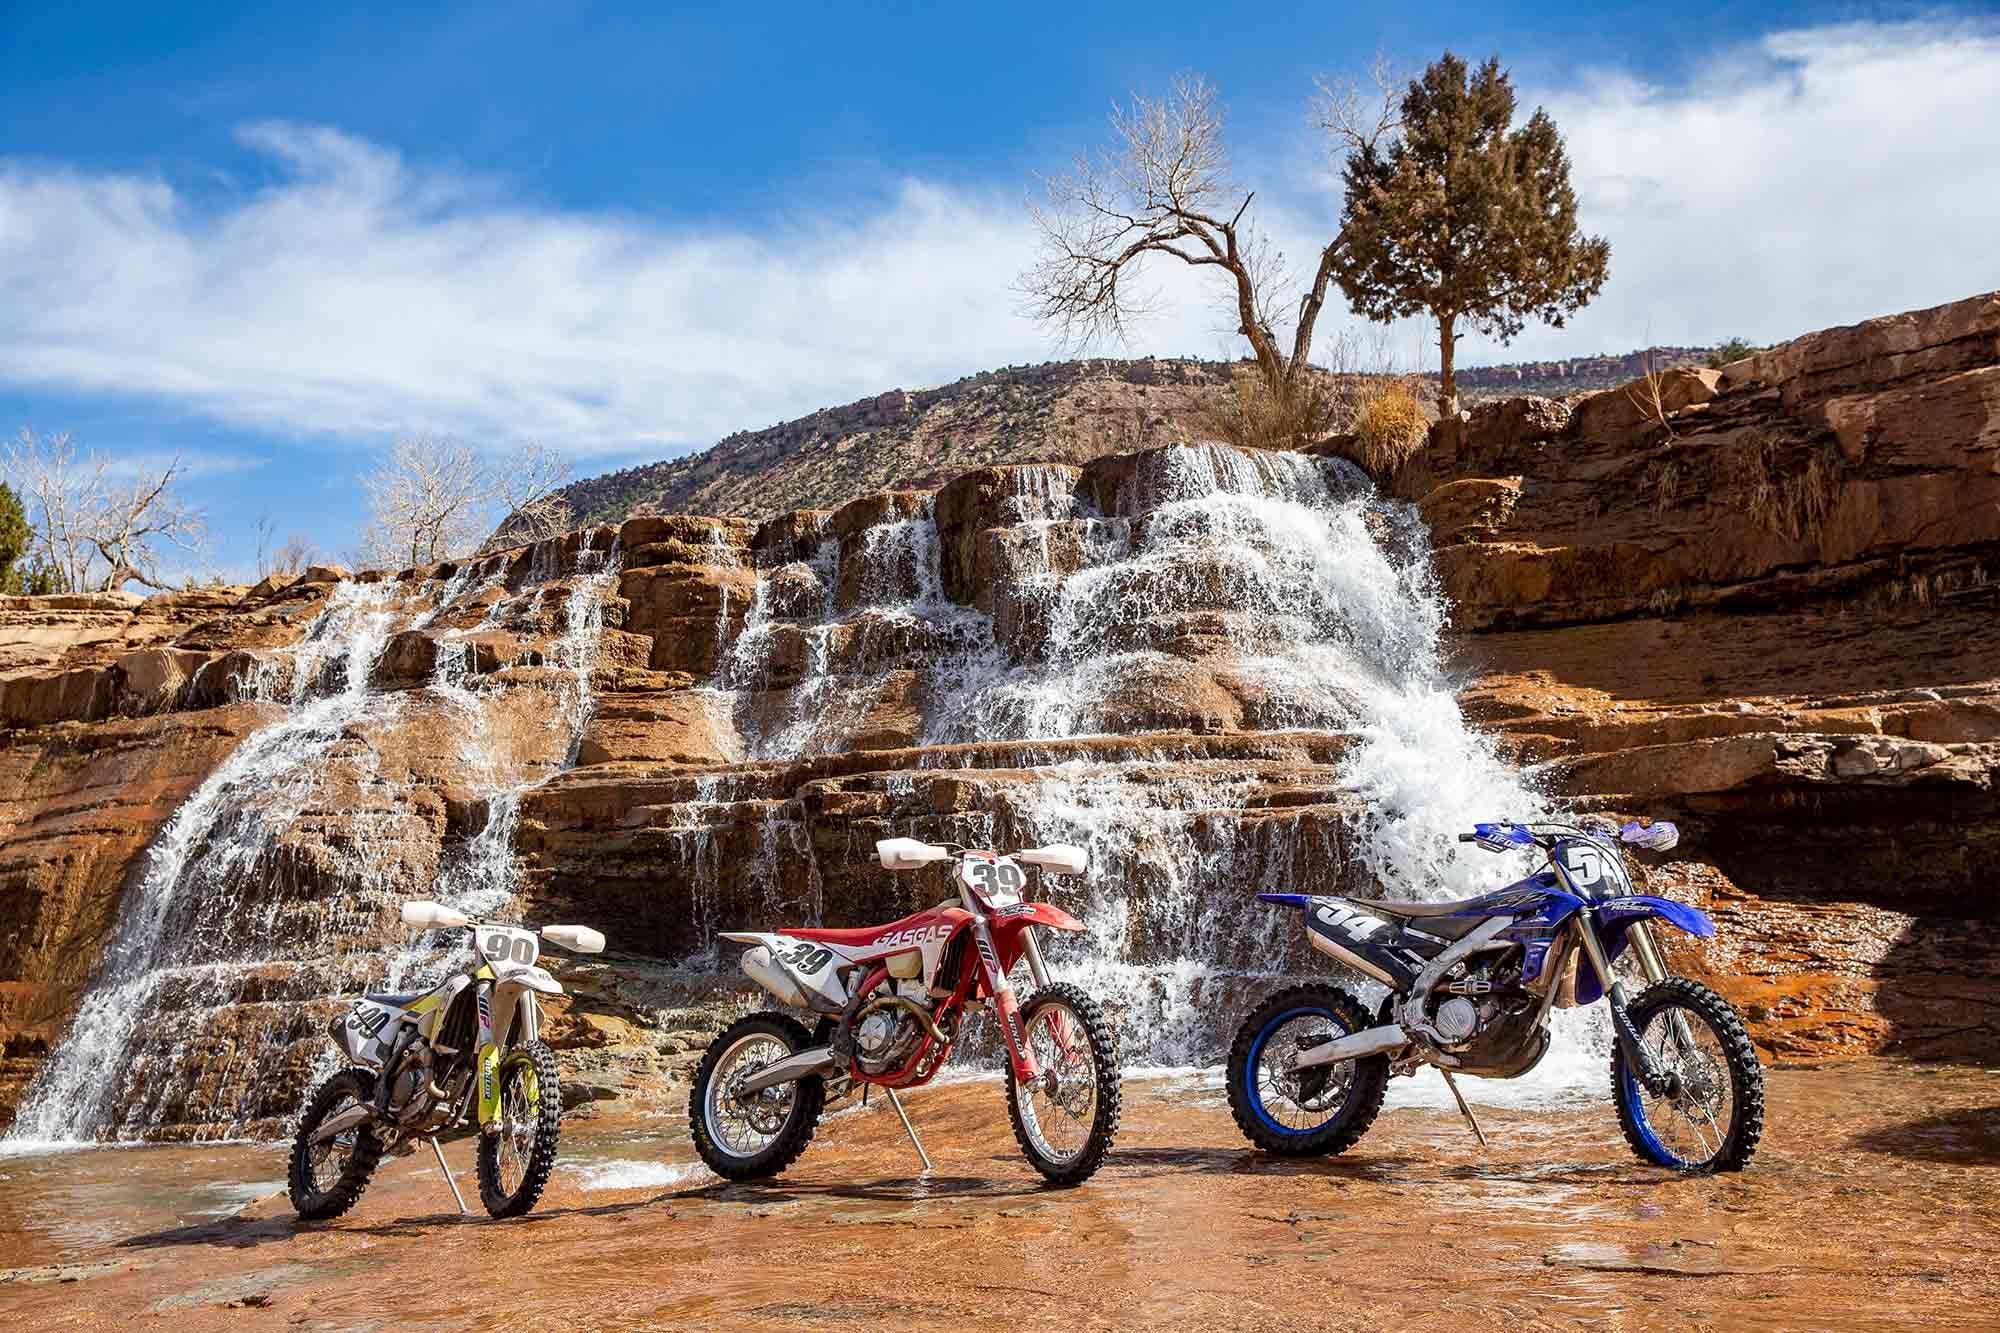 “Depending on the intended usage and type of rider, all of the bikes are winners. Smaller, lighter riders and vets will respond well to the YZ250FX and EX 350F. The FX 450 has a place, but it isn’t in supertechnical trails and likes to be ridden with some space.” —Casey Casper